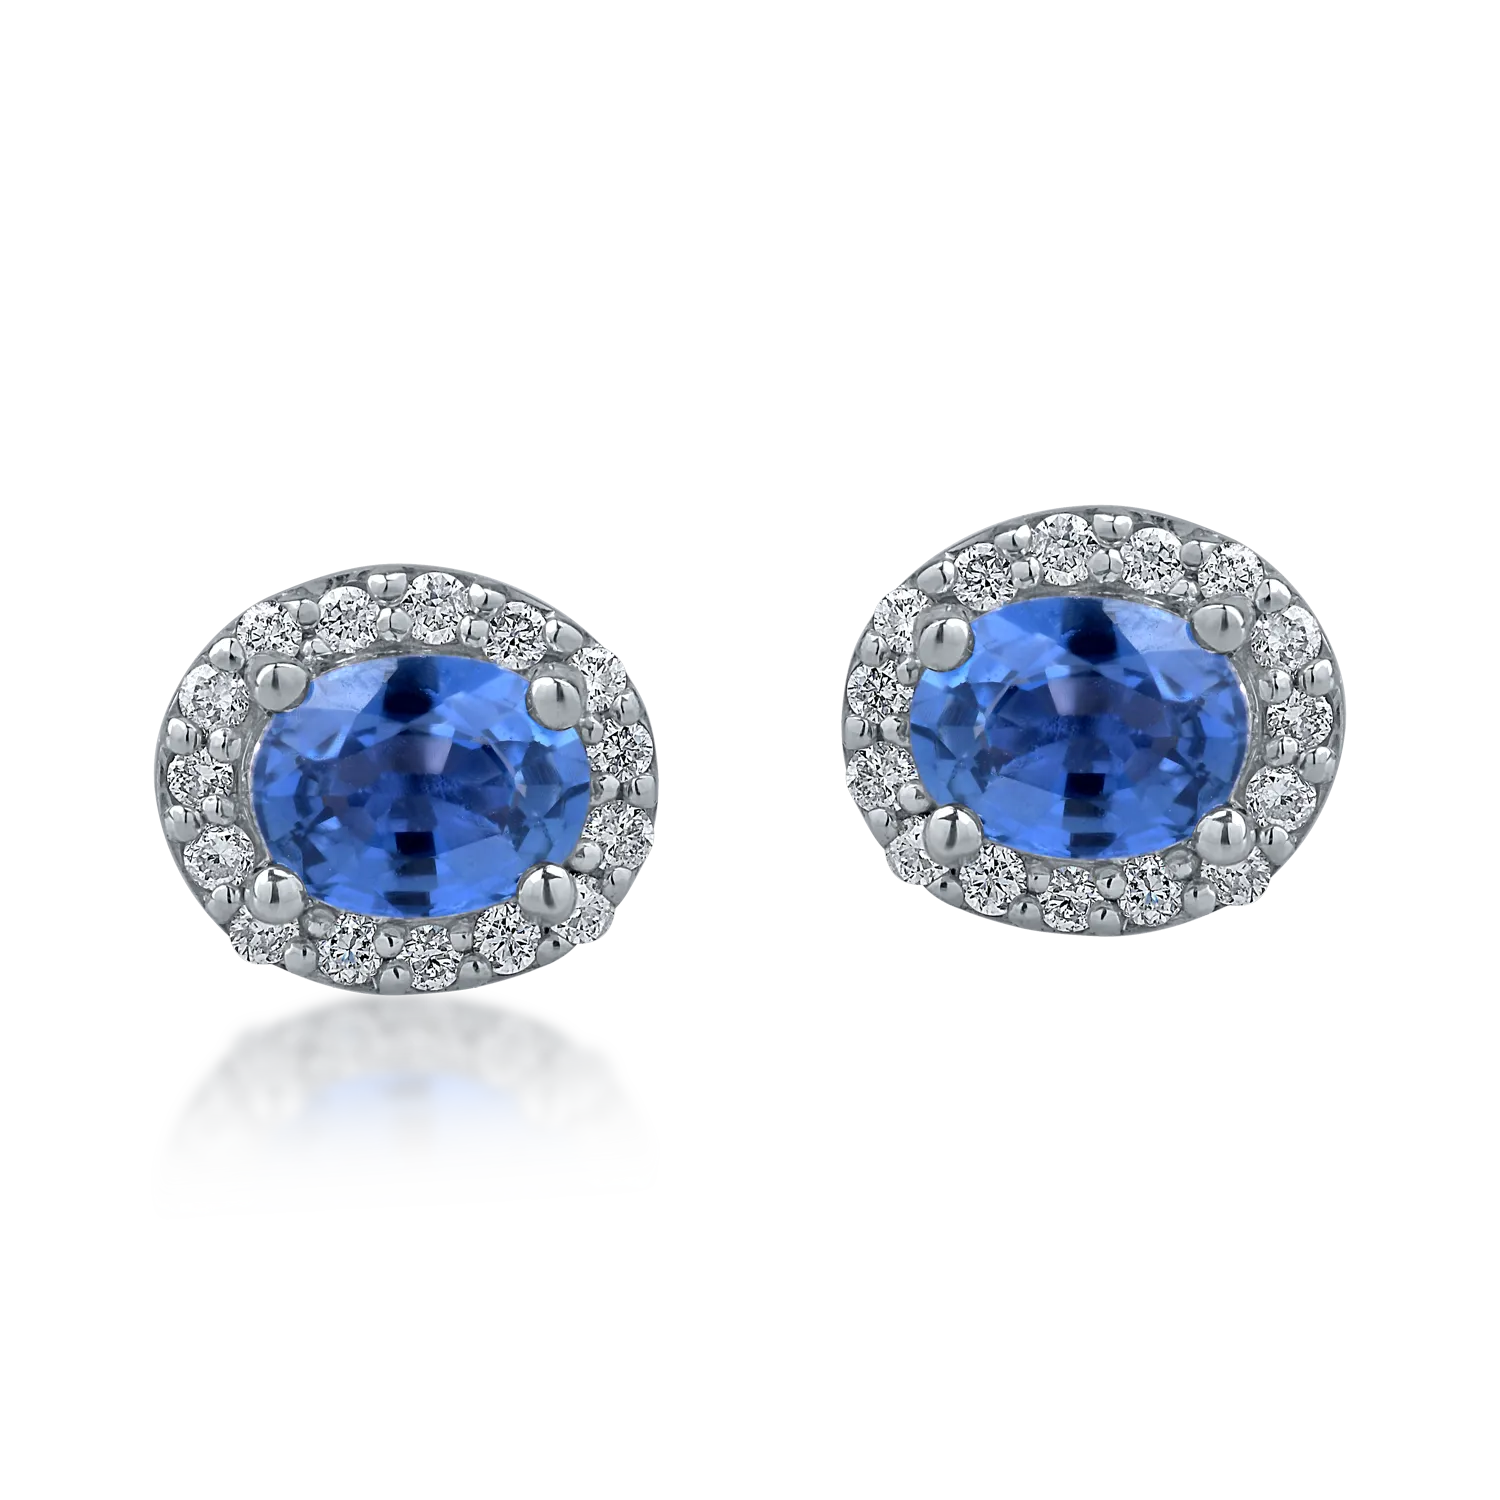 White gold oval earrings with 0.74ct sapphires and 0.16ct diamonds